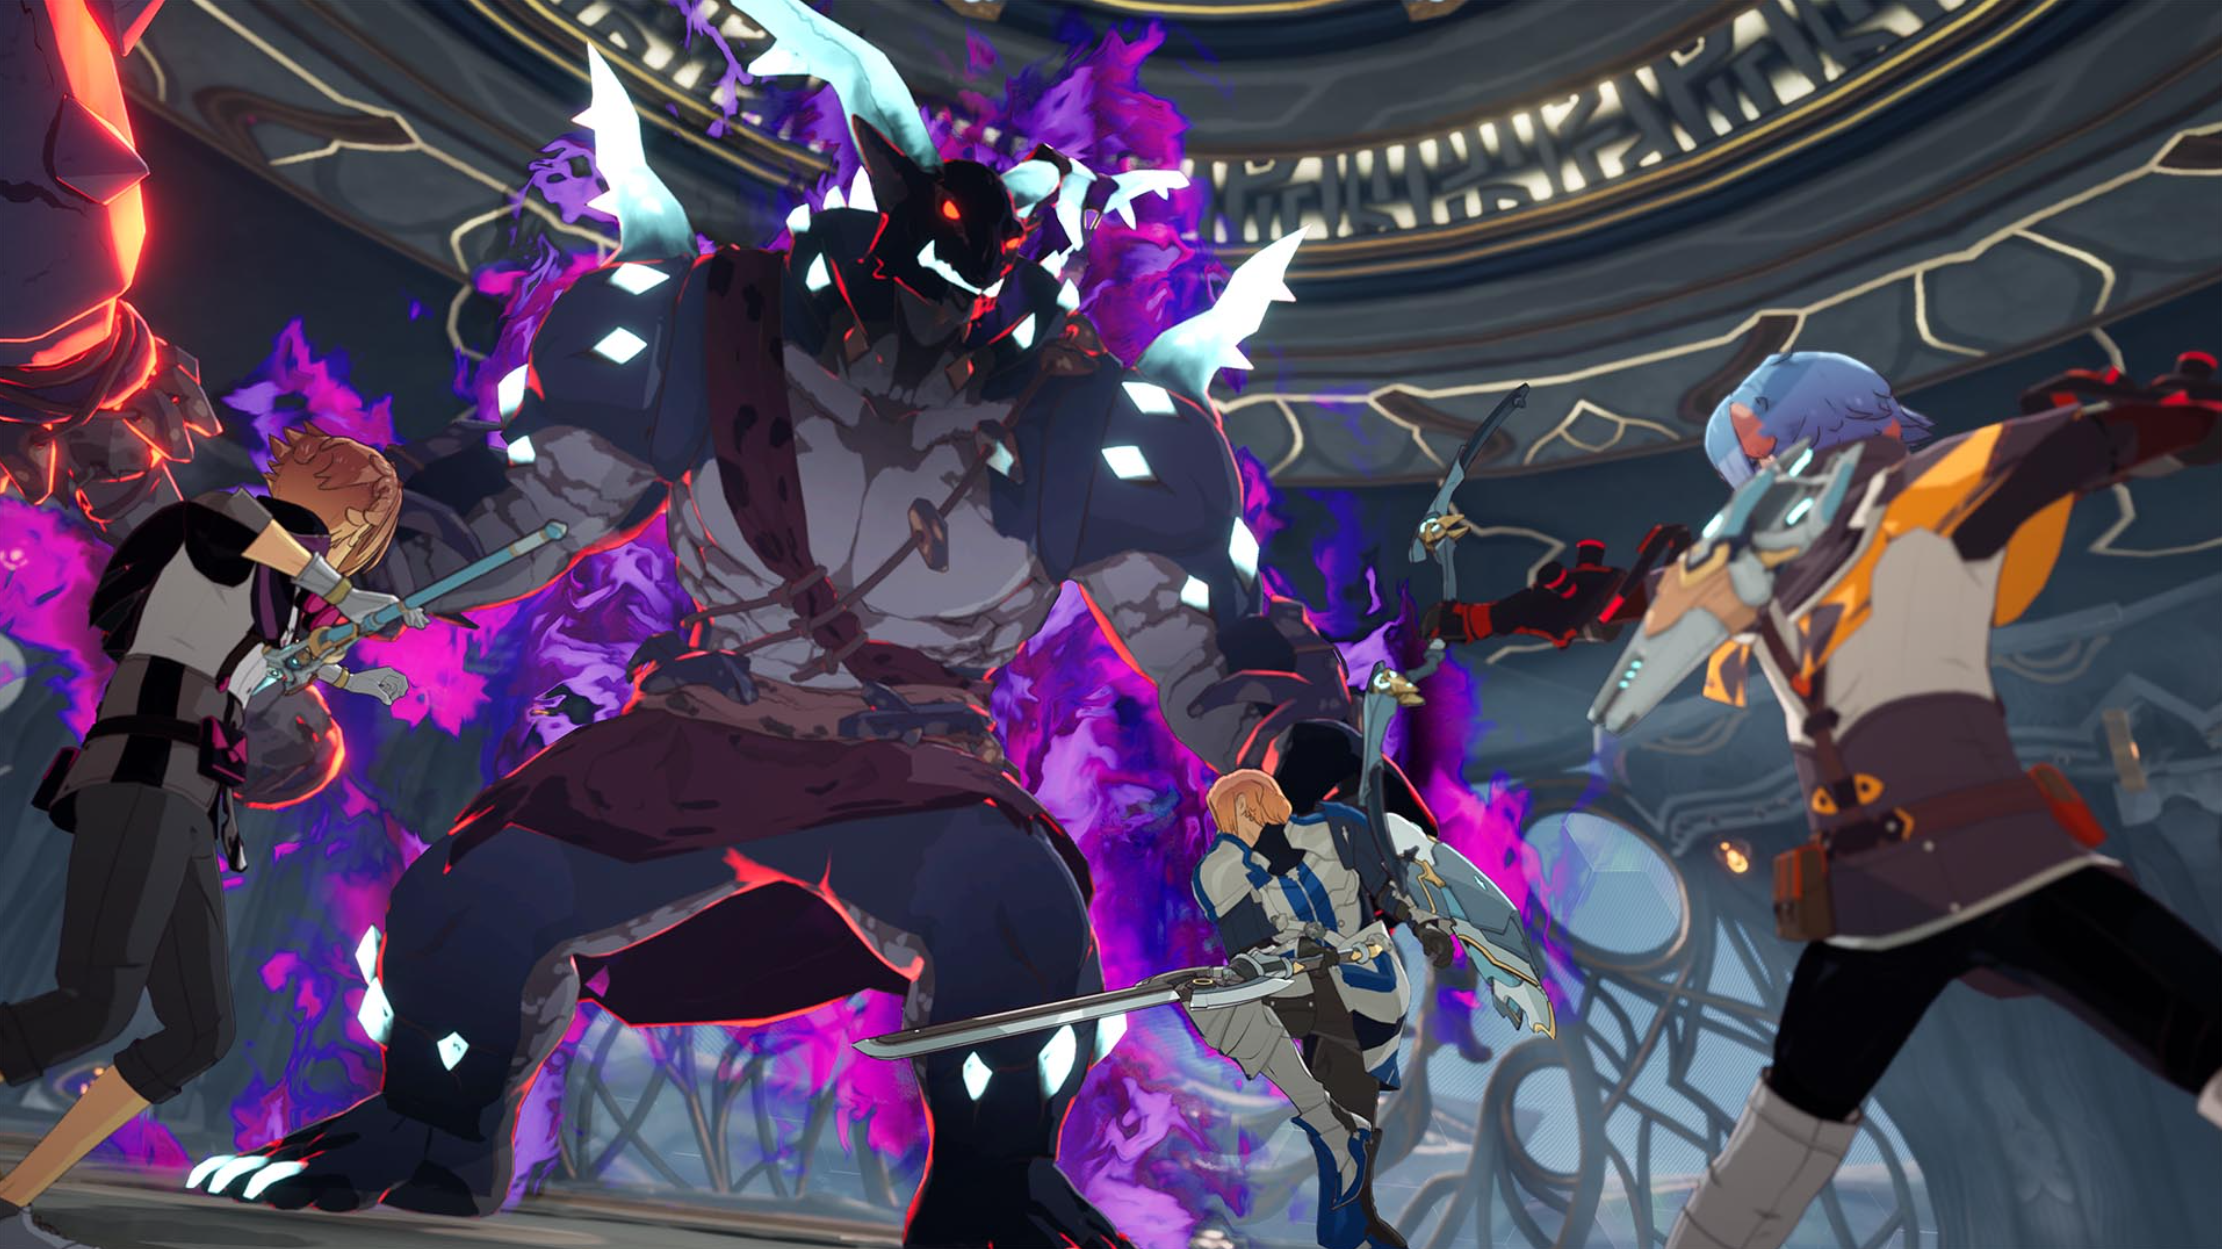 Blue Protocol lets you fight bosses with your teammates and friends